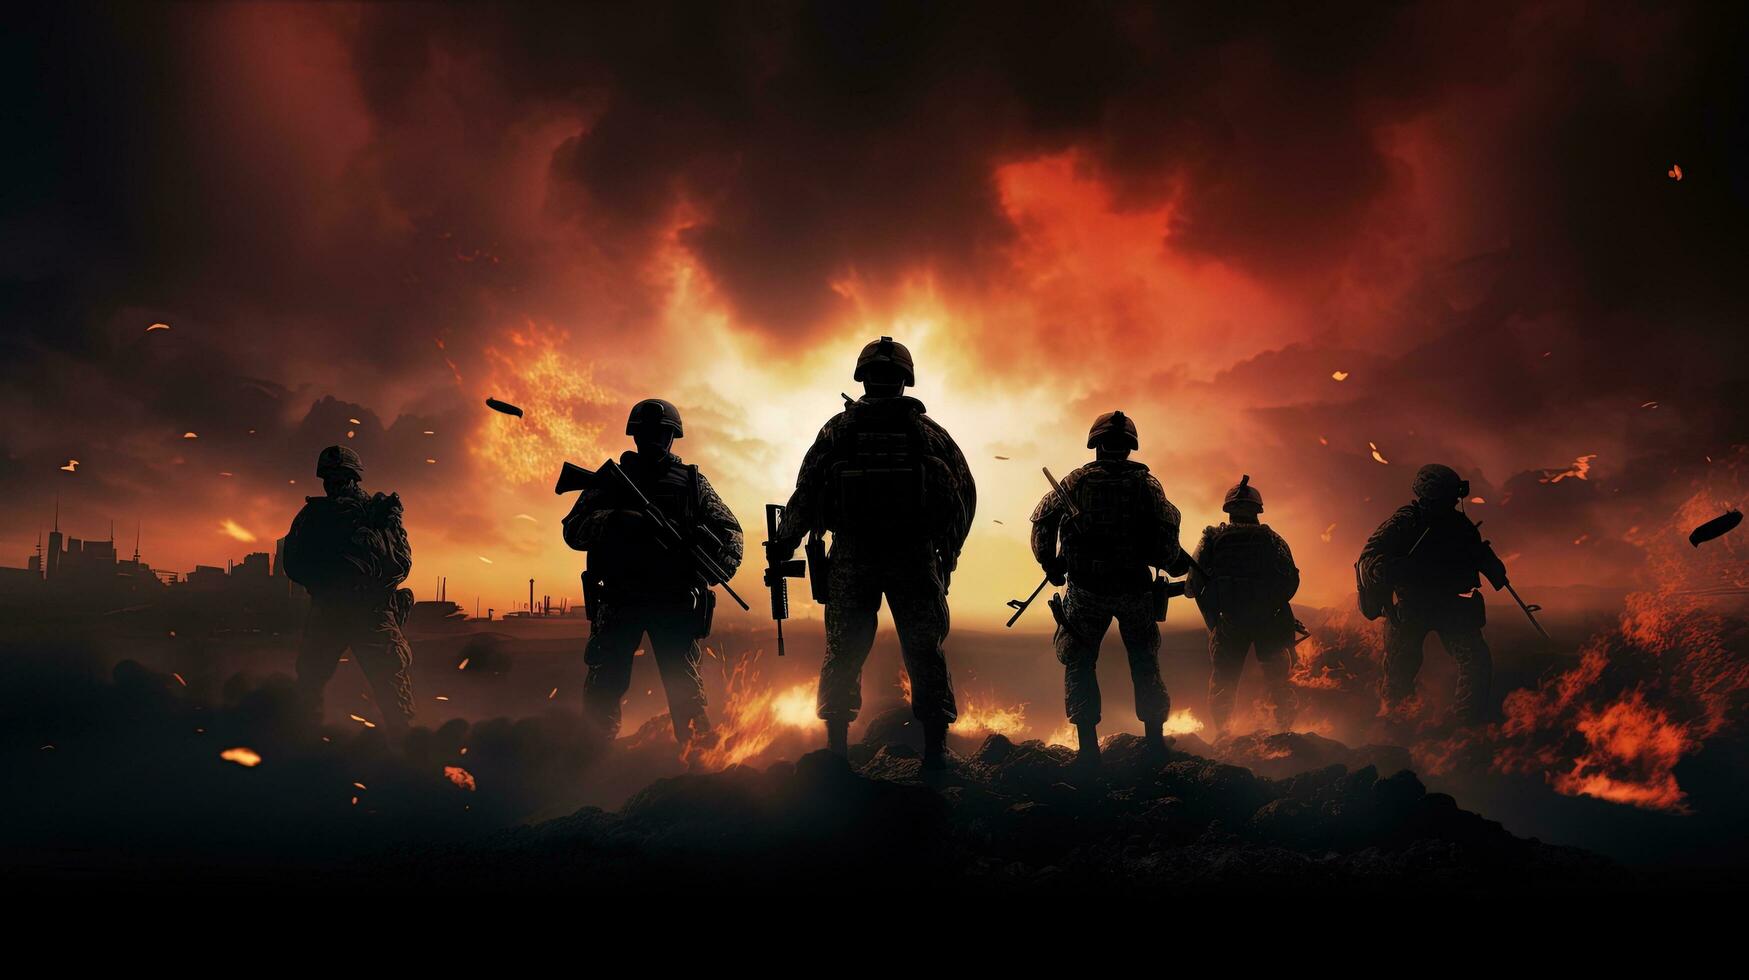 An image of soldiers in battle amidst explosions and smoke. silhouette concept photo